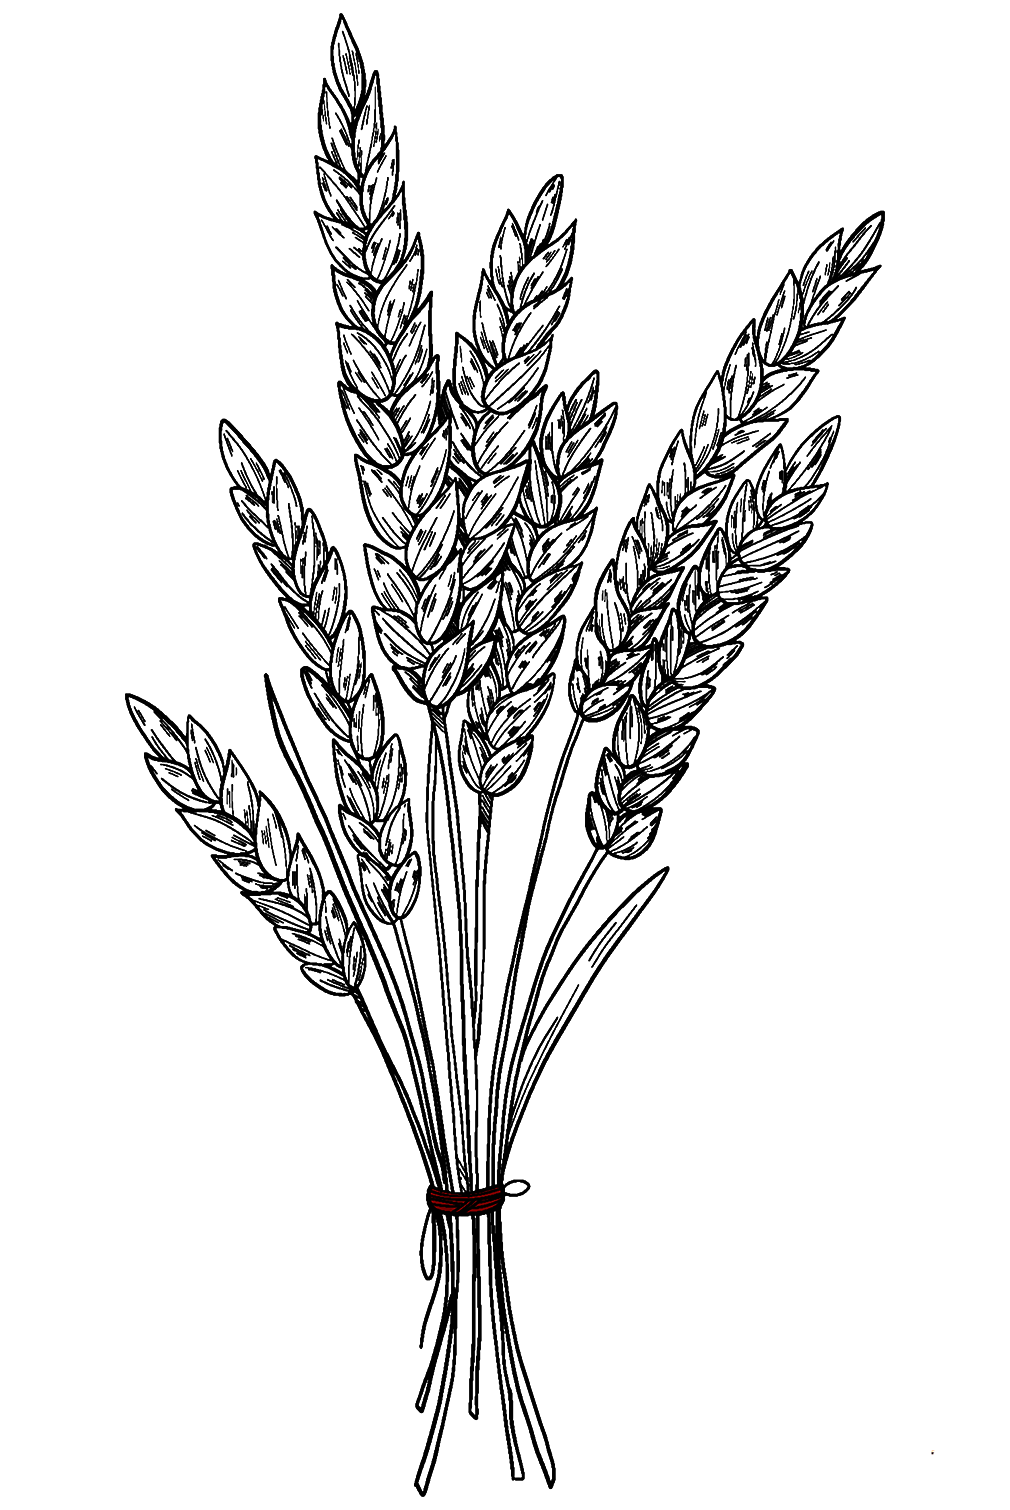 Wheat In Fall Coloring Page